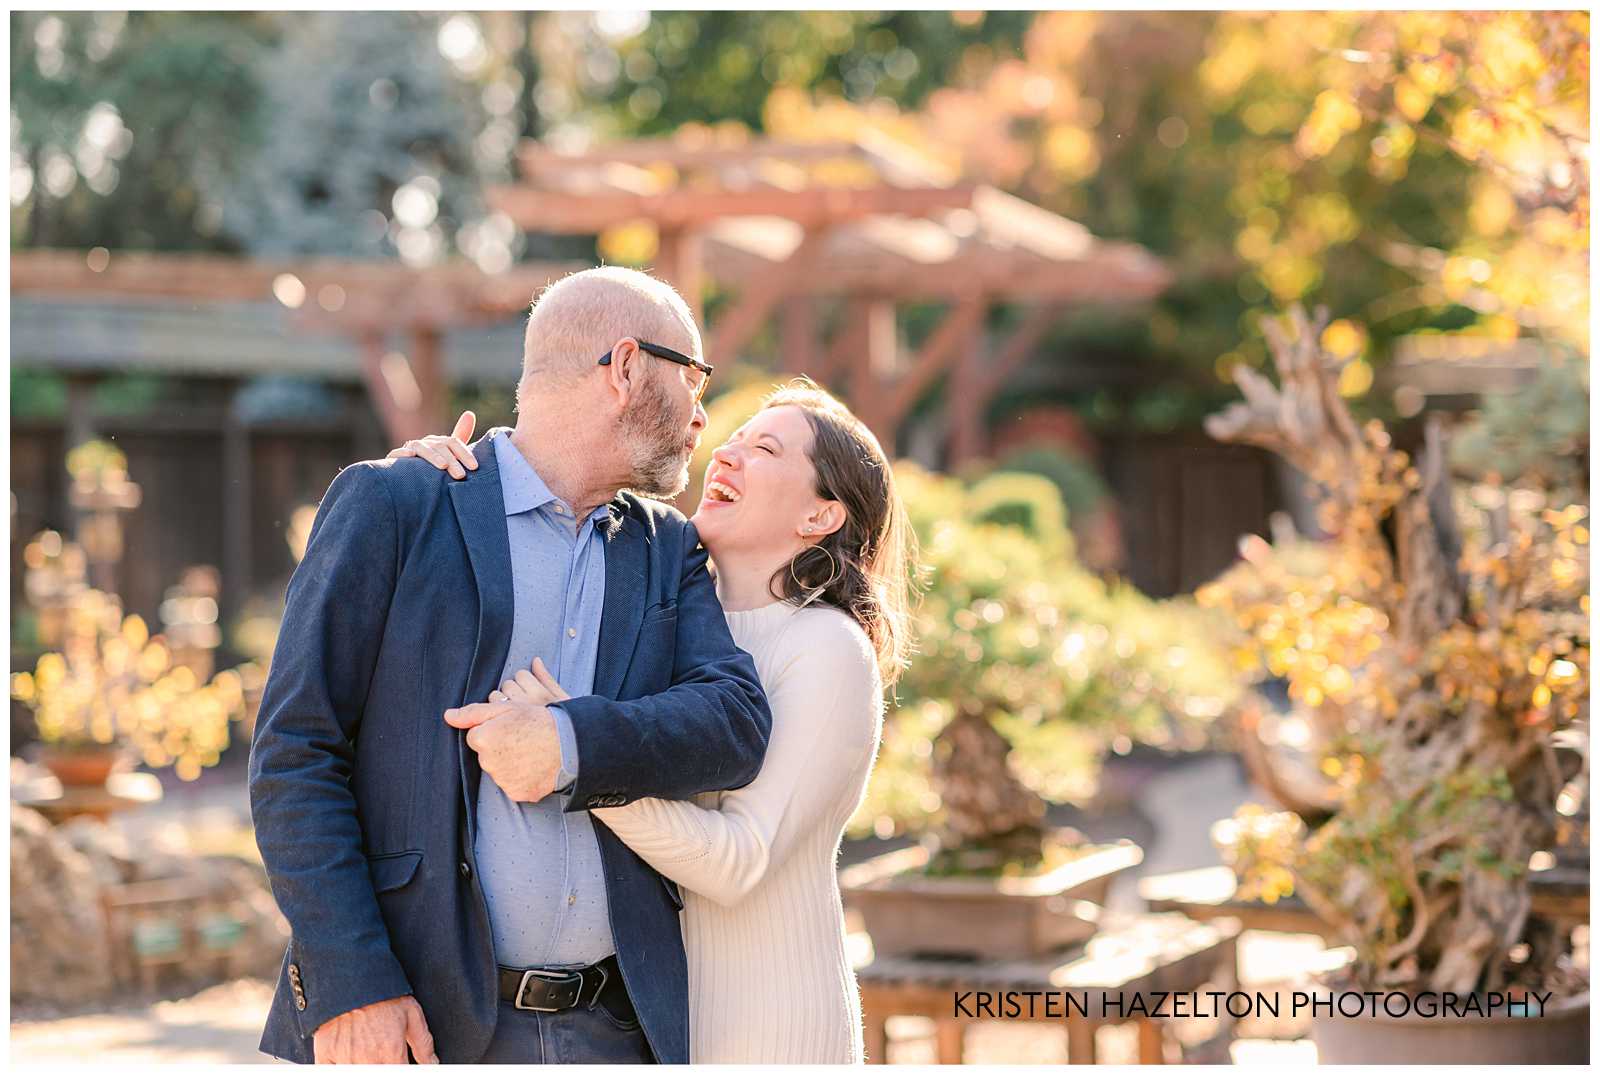 Man and woman laughing in photos by Bay Area Engagement Photographer Kristen Hazelton